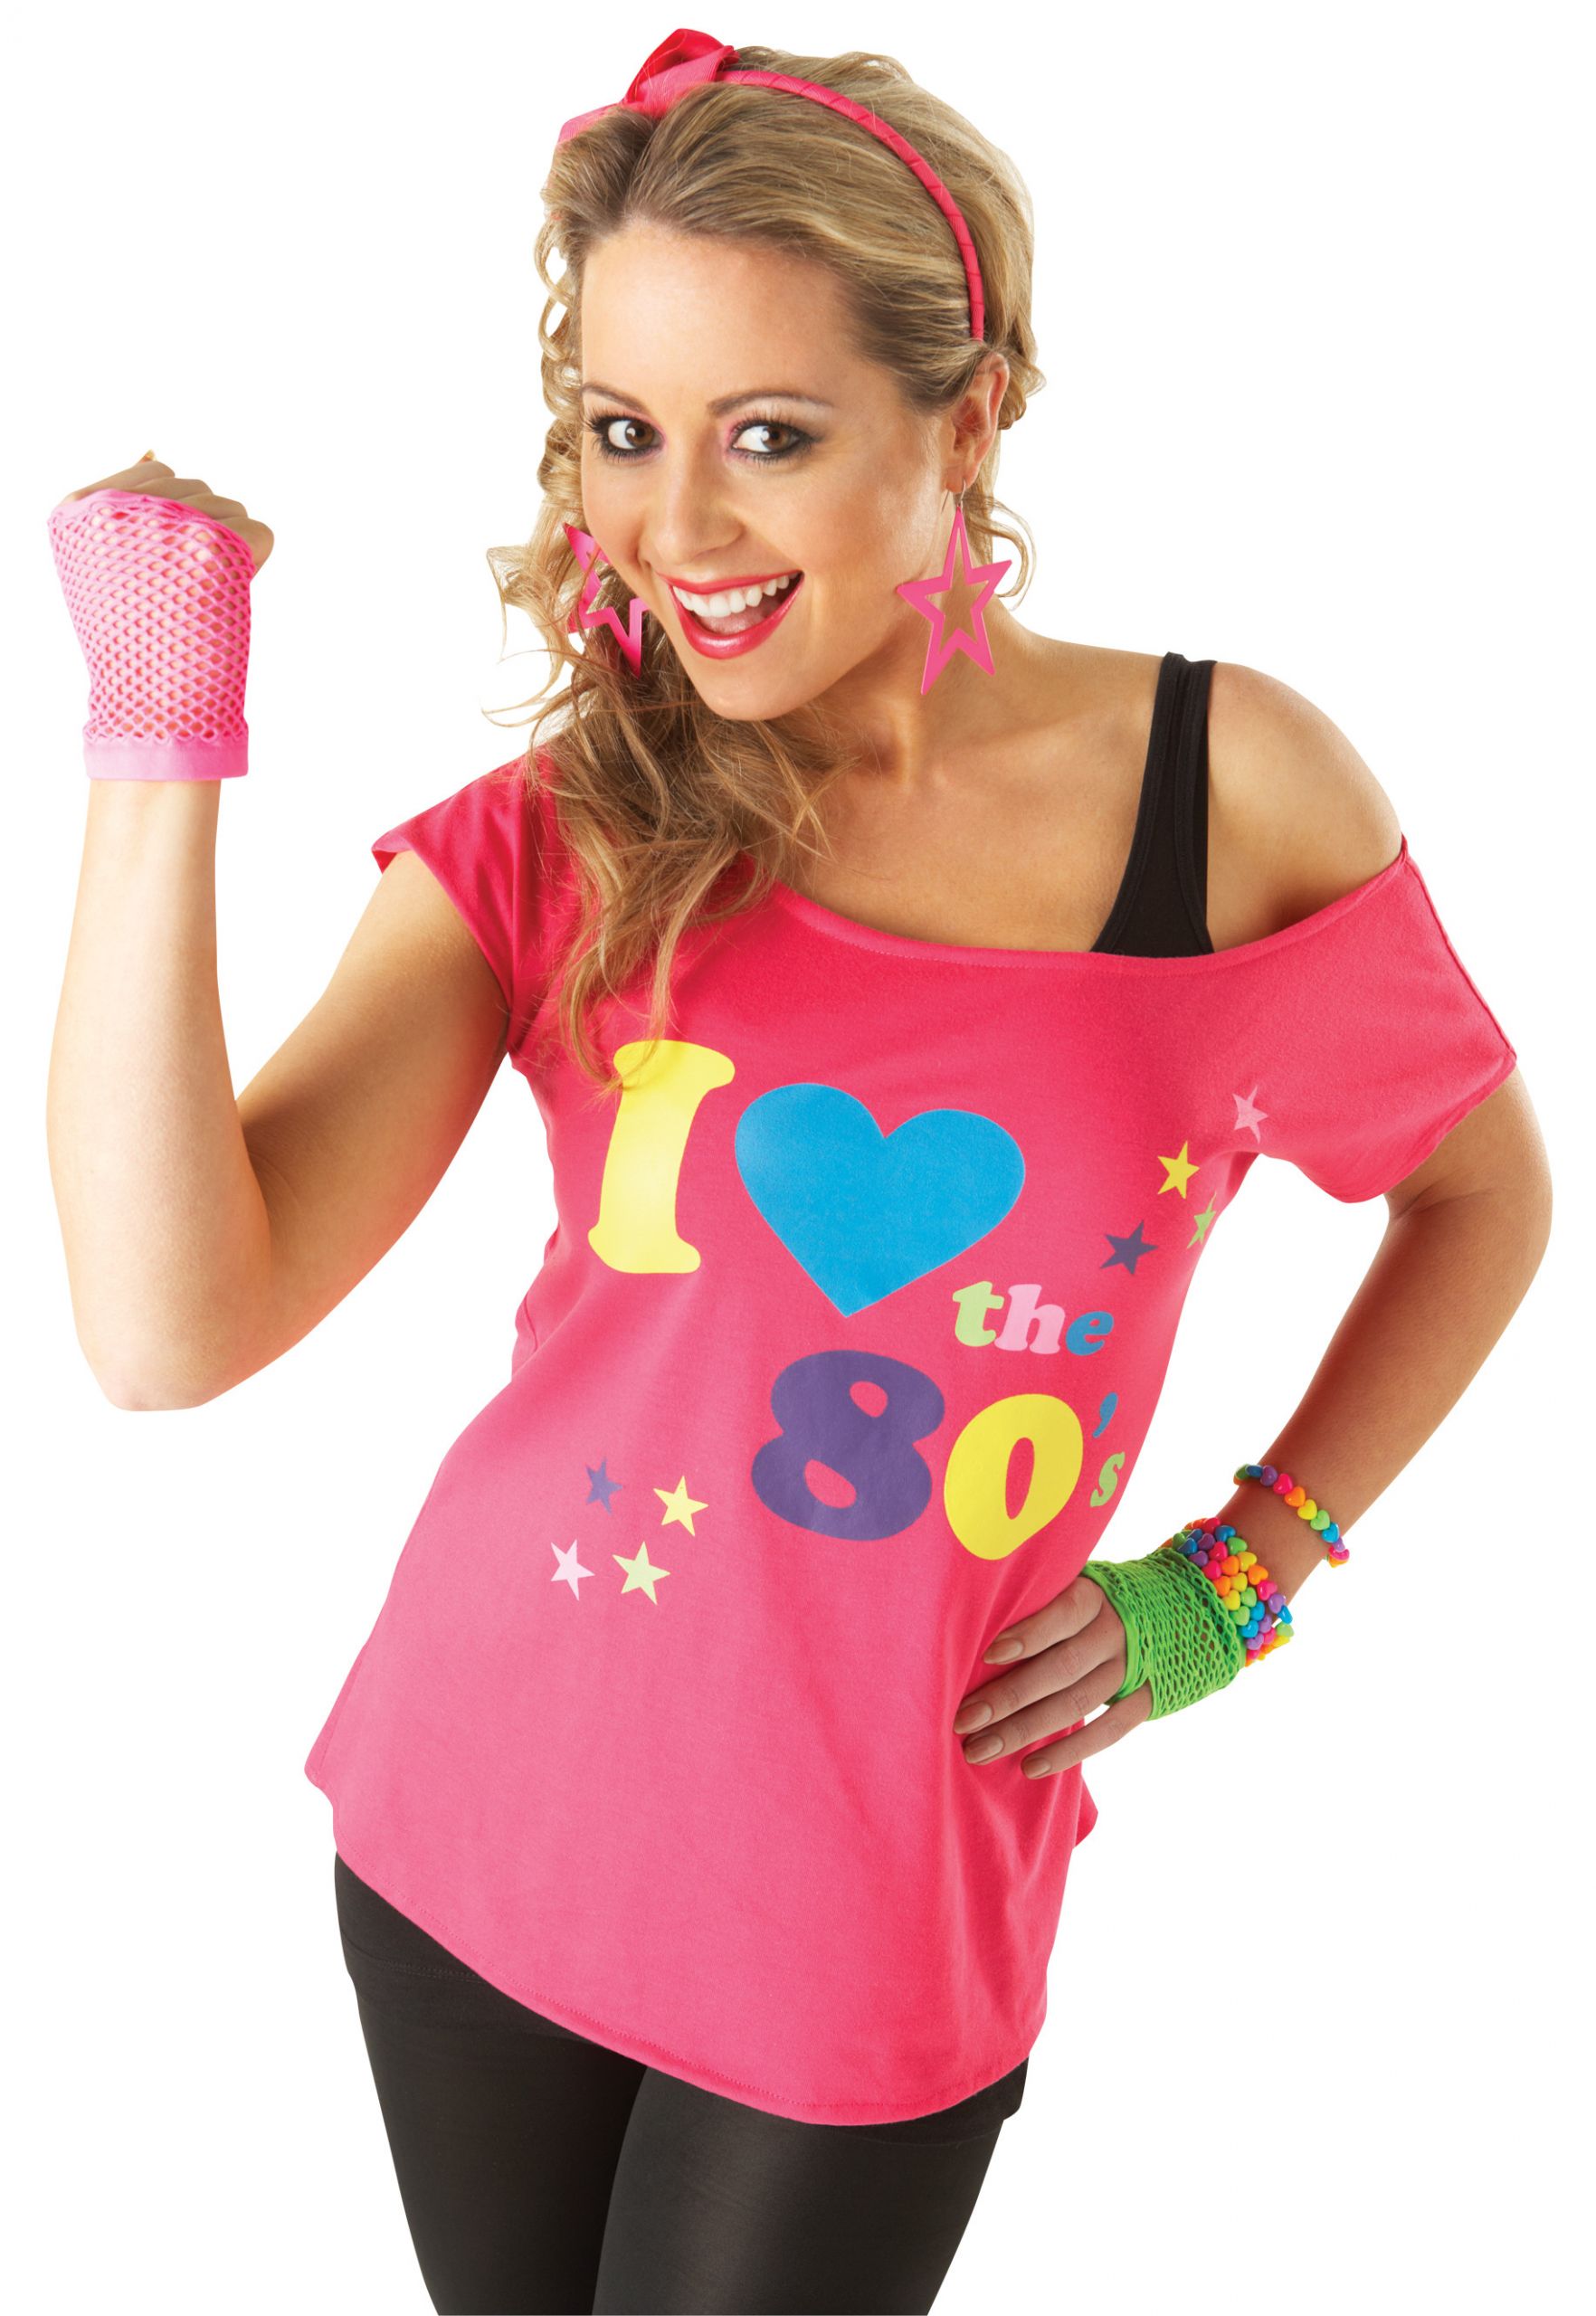 80'S Fashion For Kids
 C955 I Love the 80 s Pink T shirt Costume 1980s Fancy